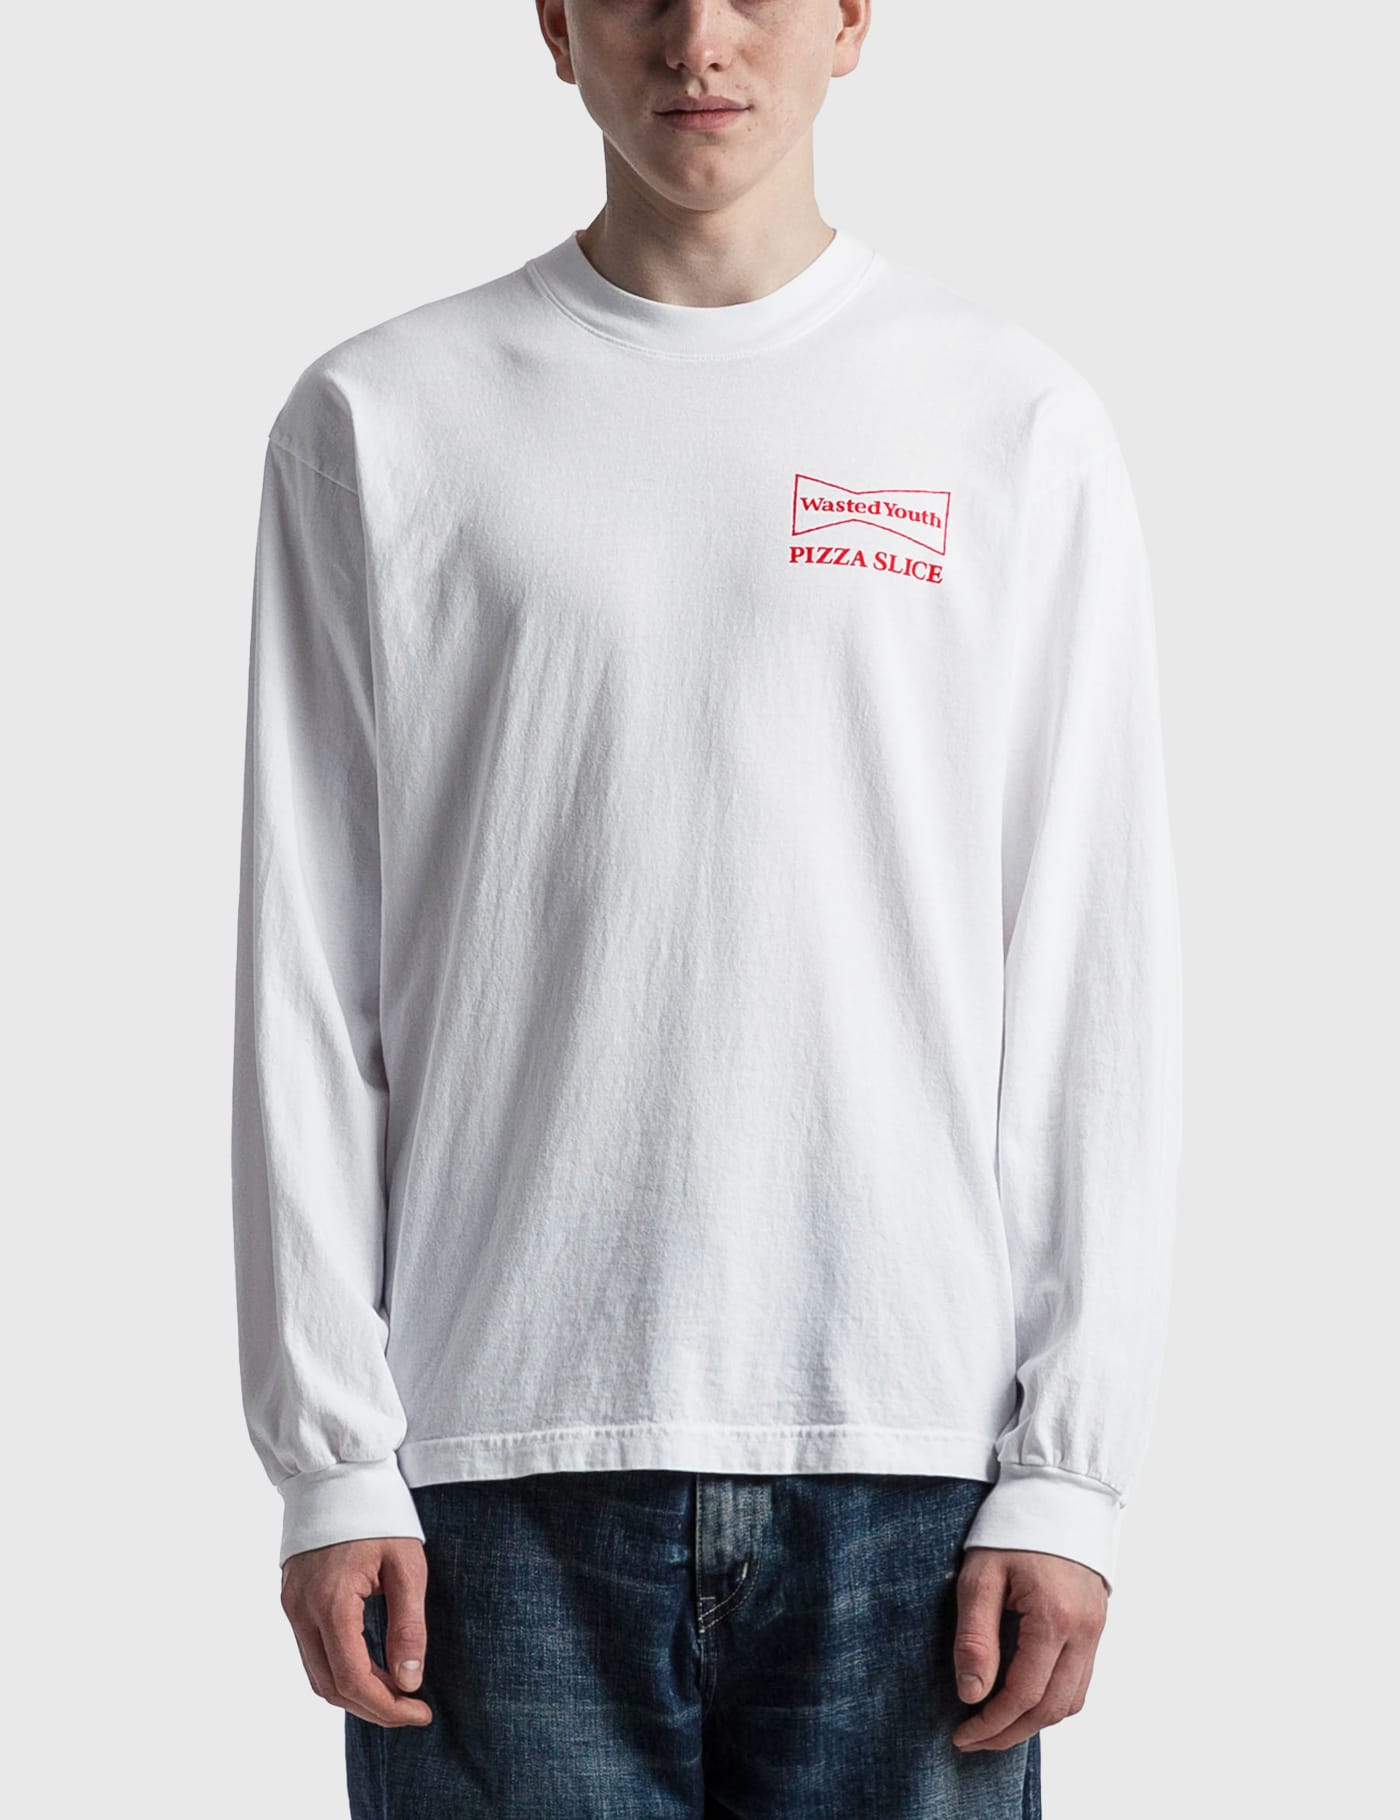 Wasted Youth - Wasted Youth x Pizza Slice Long Sleeve T-shirt